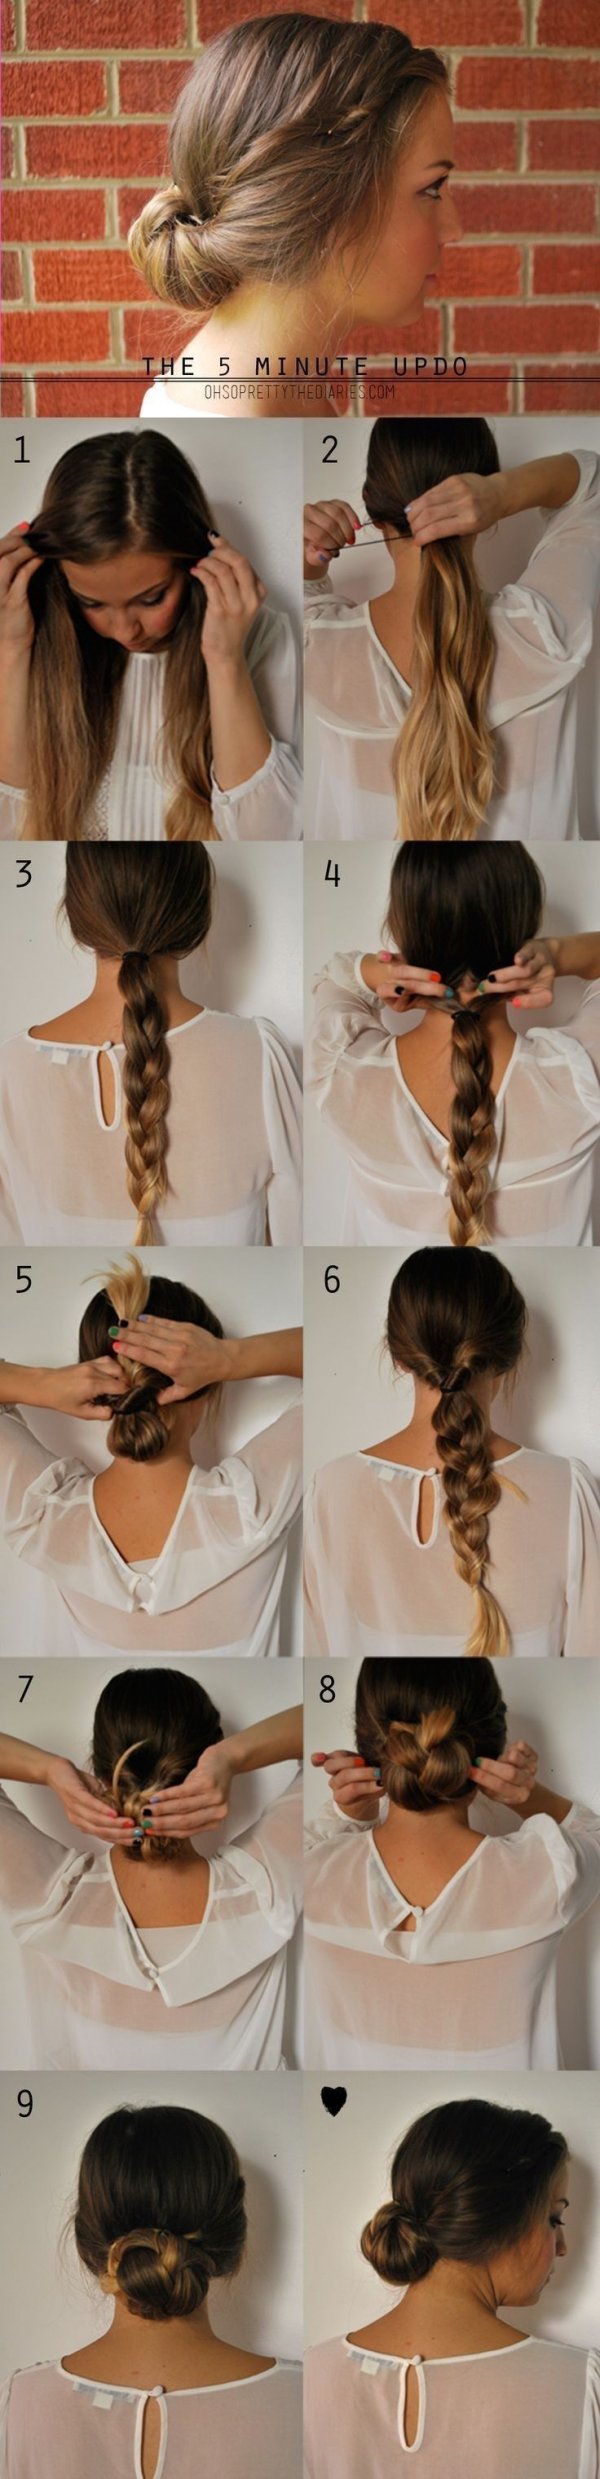 The 5-minute Updo